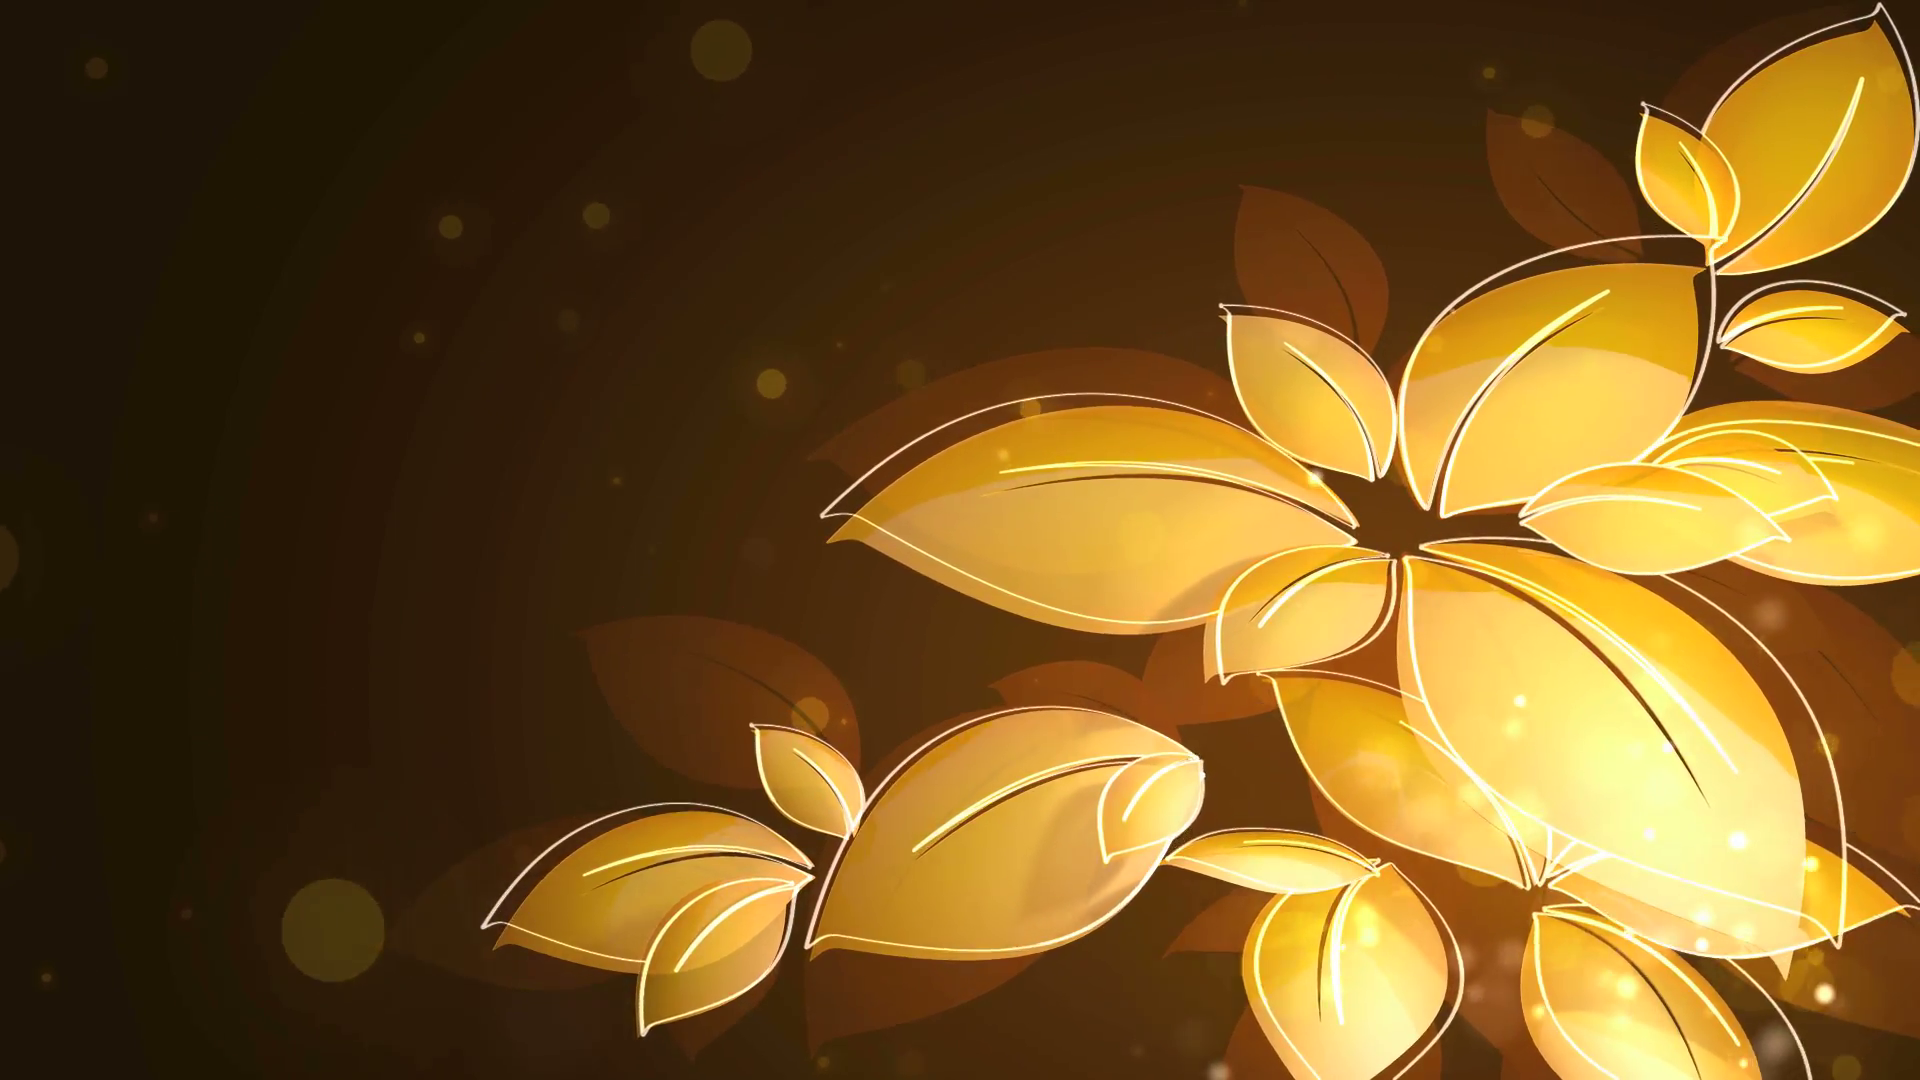 golden leaves waggle in the wind Motion Background - Videoblocks